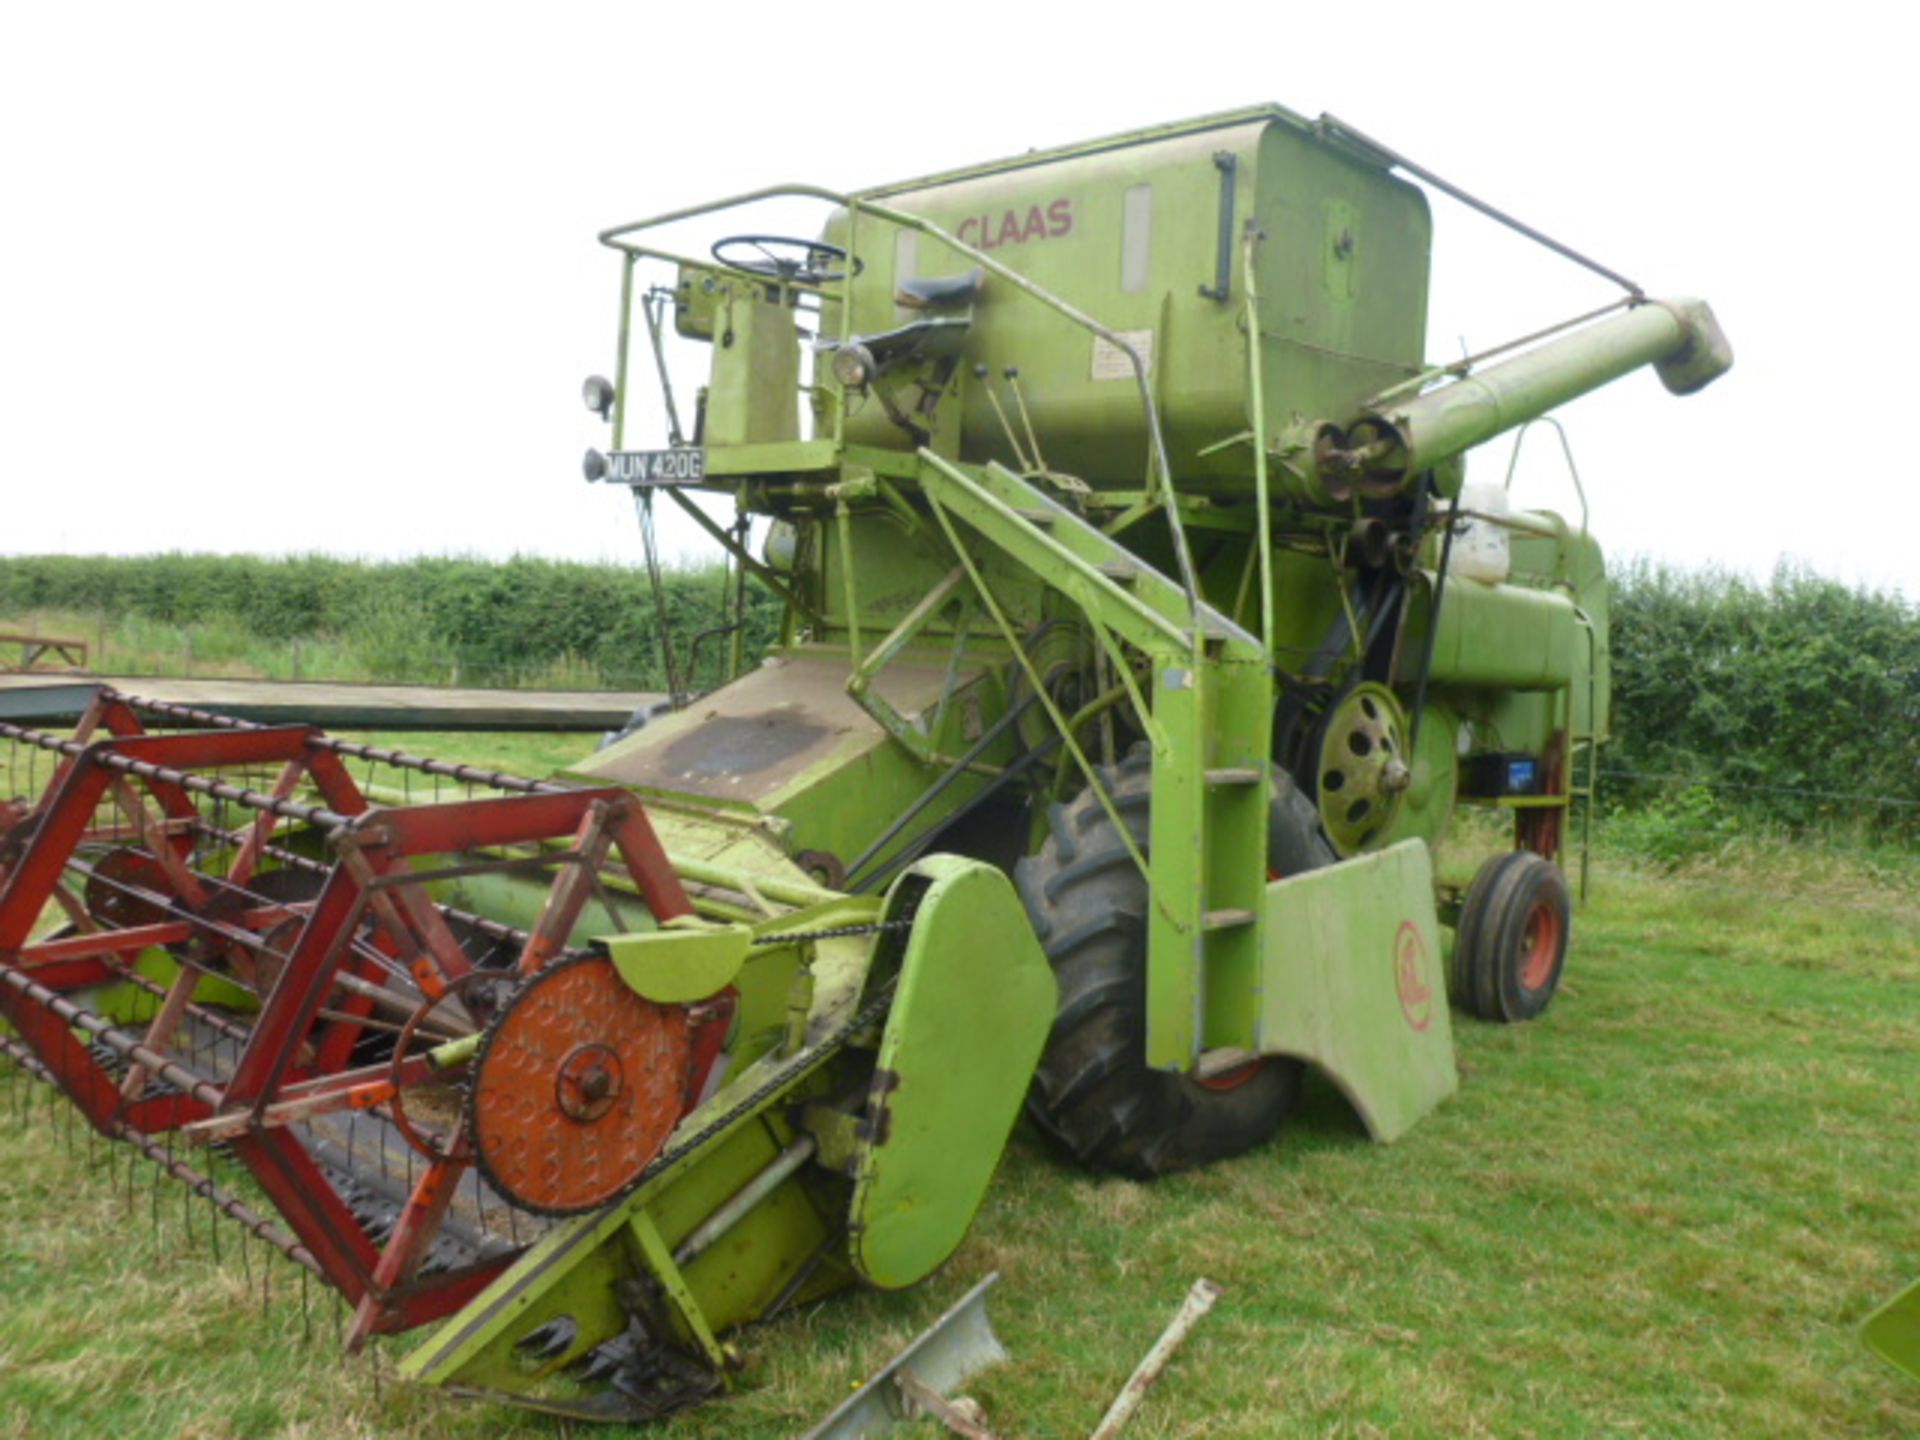 CLAAS MATADOR COMBINE , WORKING ORDER. ONE OWNER FROM NEW - Image 3 of 3